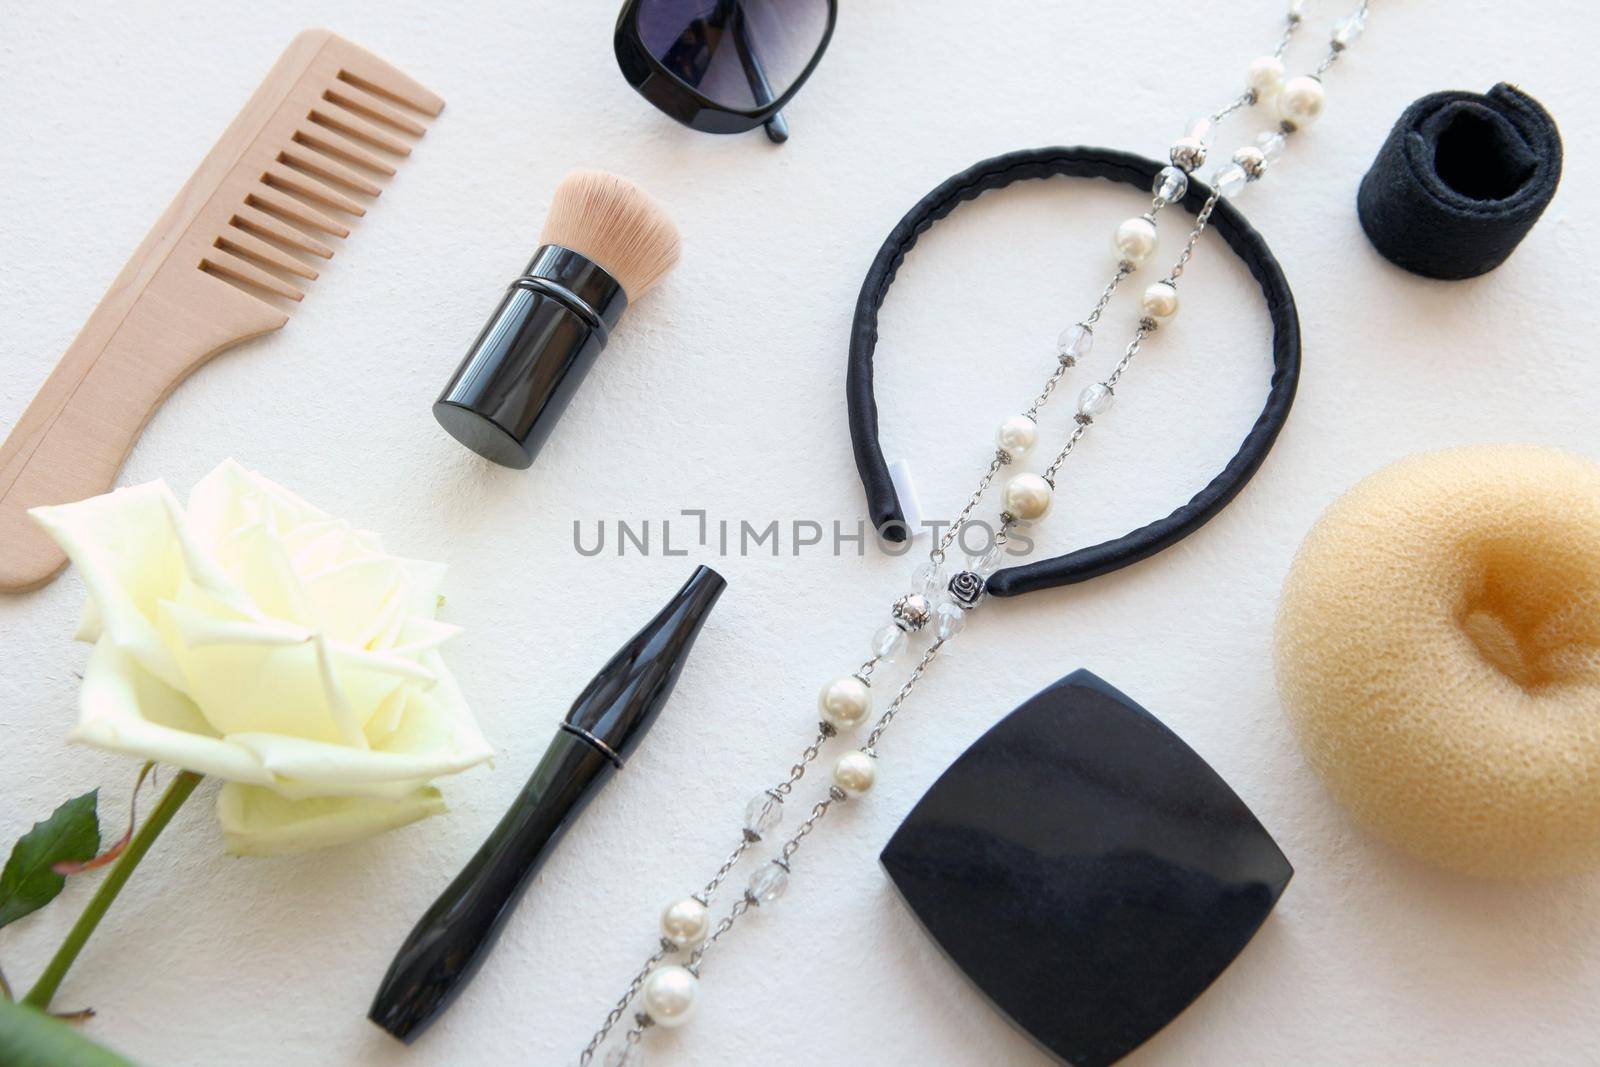 wooden Hairbrush, sunglasses, barrette and Scrunchy isolated on white. Flat lay black Hairdressing tools and other woman beauty accessories with white rose and pearls.